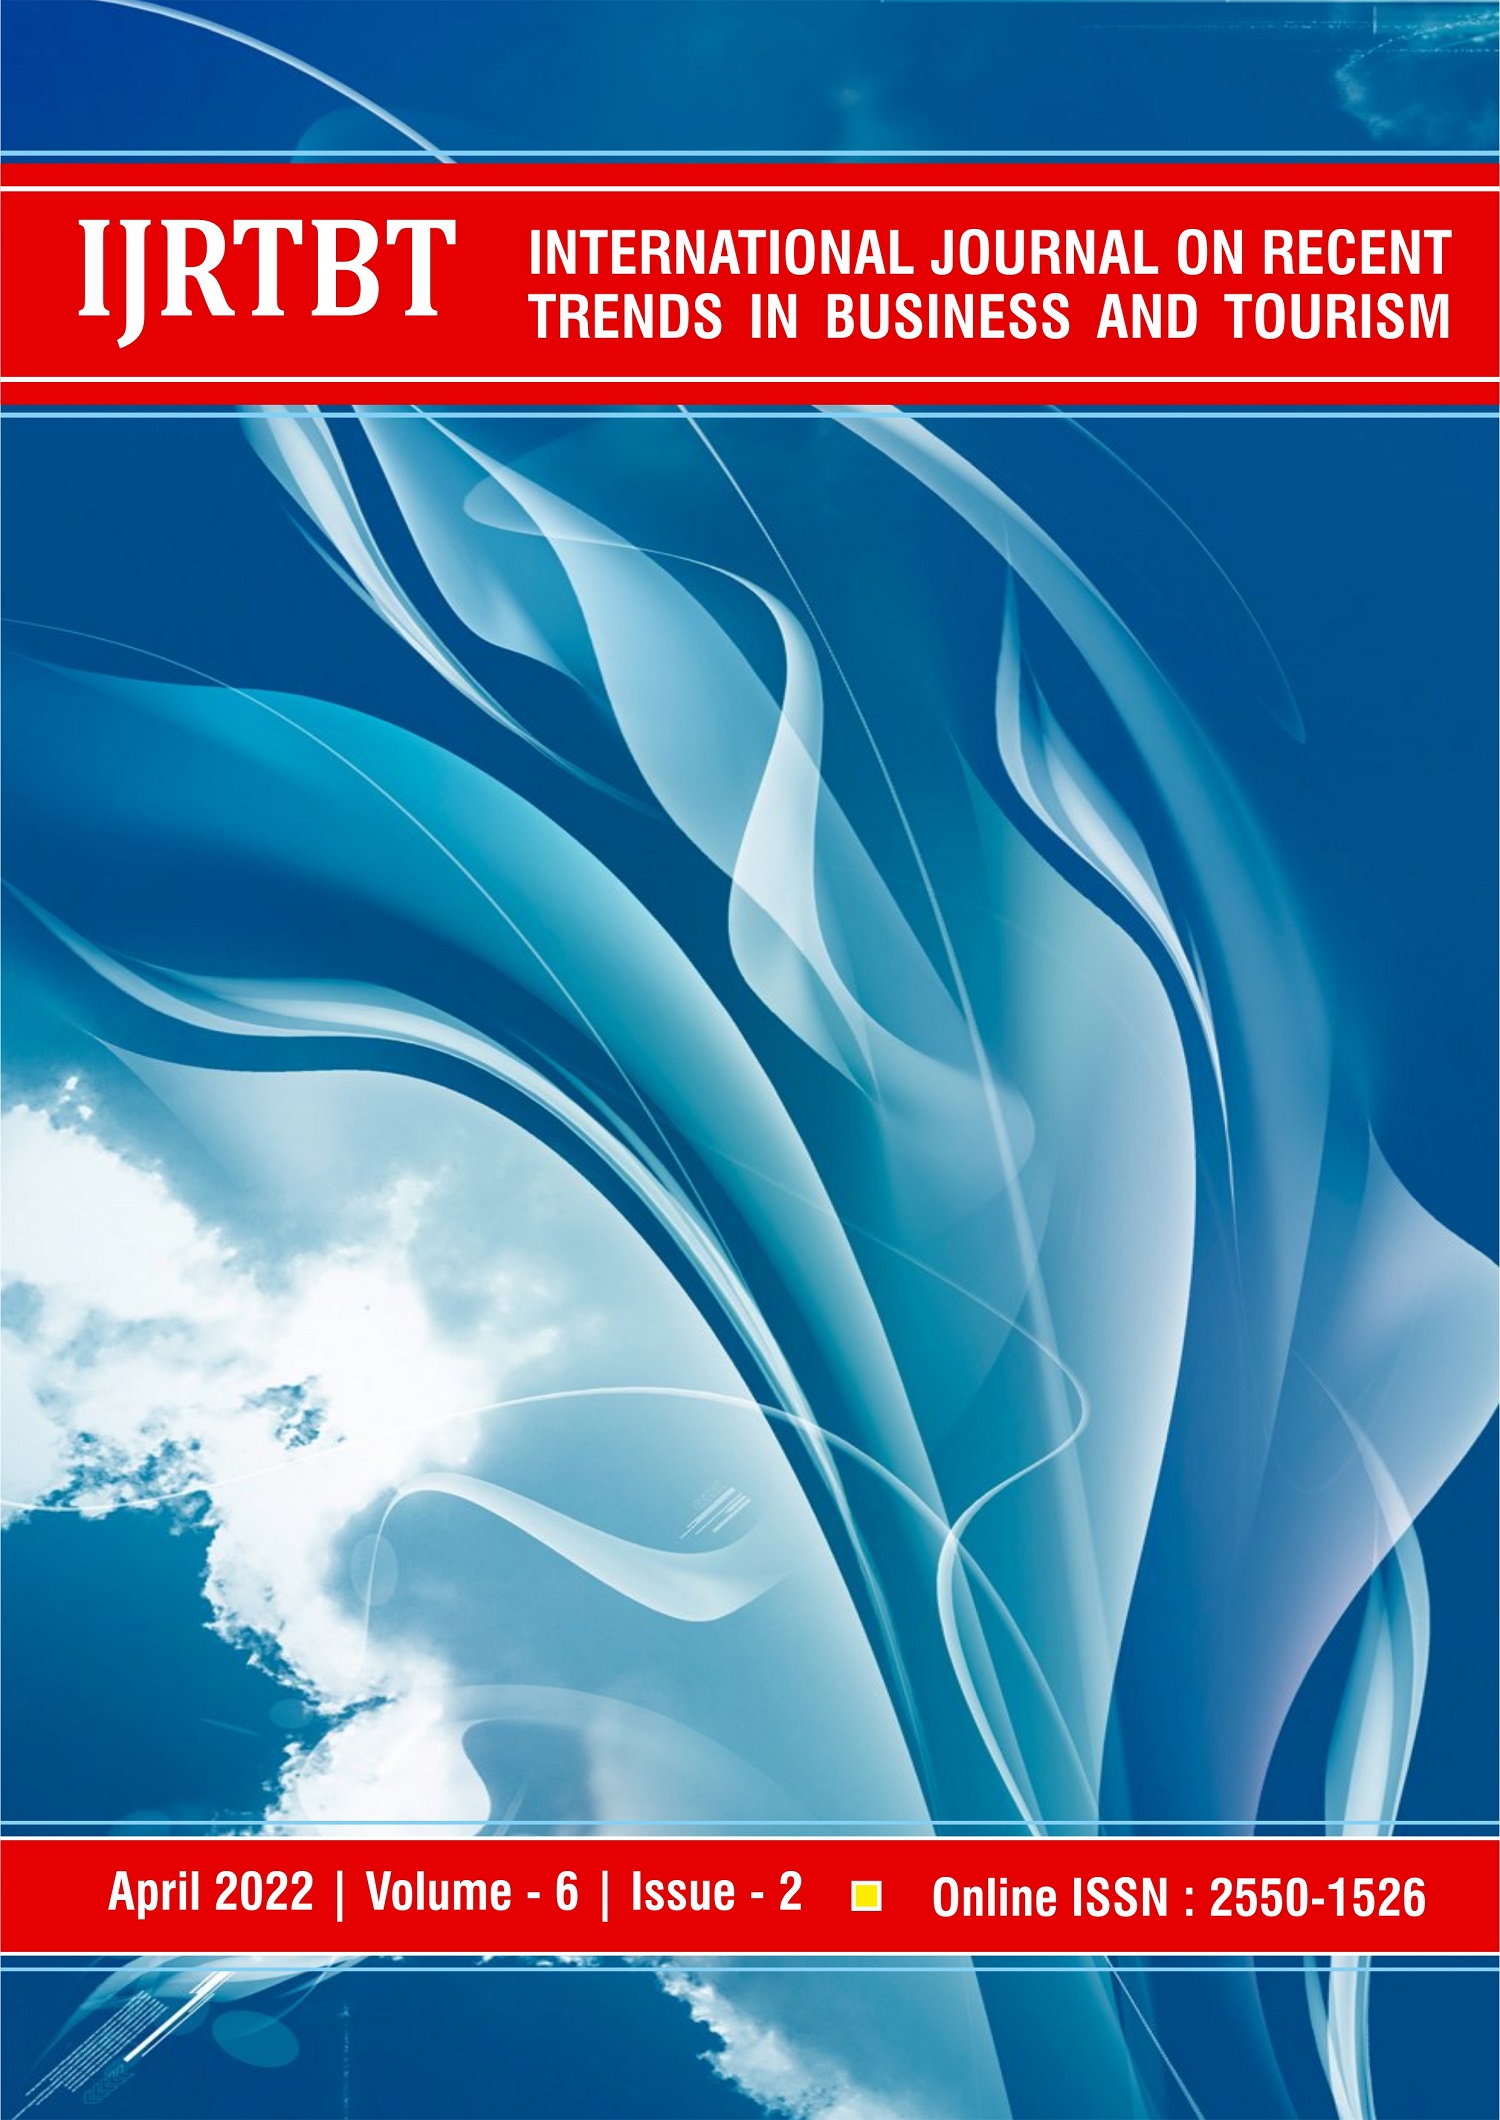 					View Vol. 6 No. 2 (2022): International Journal on Recent Trends in Business and Tourism 
				